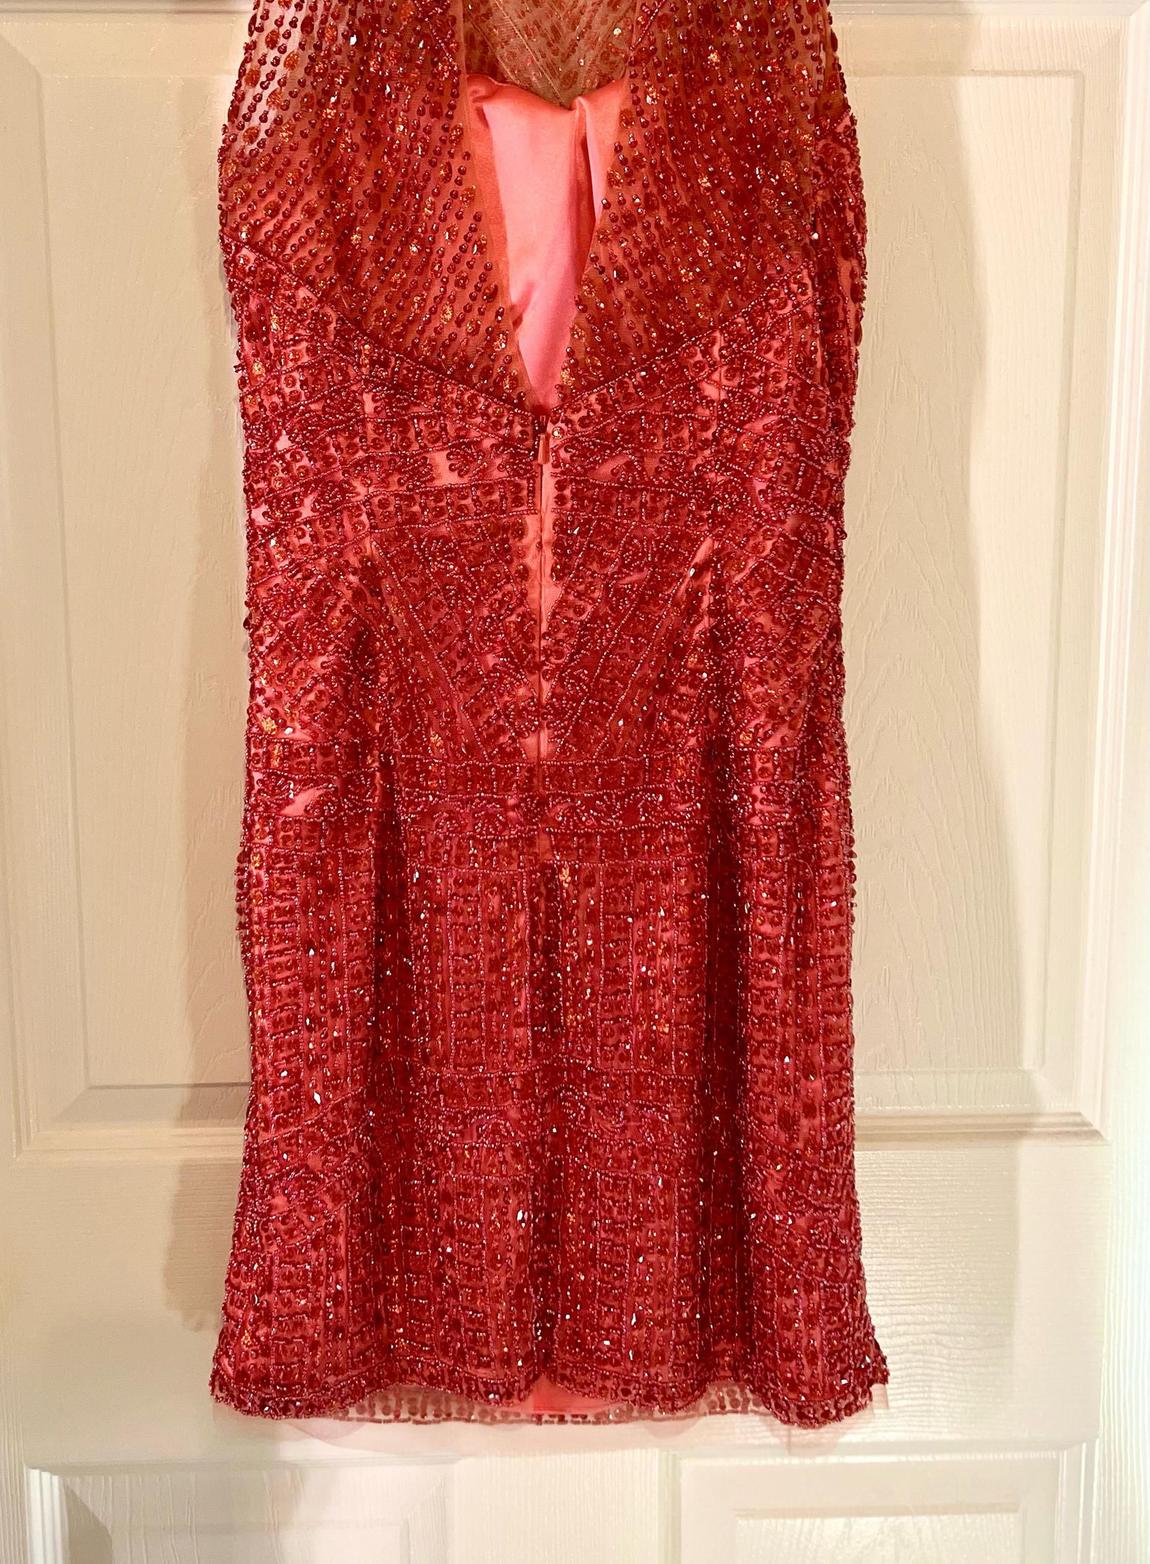 Sherri Hill Size 10 Homecoming High Neck Sequined Hot Pink Cocktail Dress on Queenly